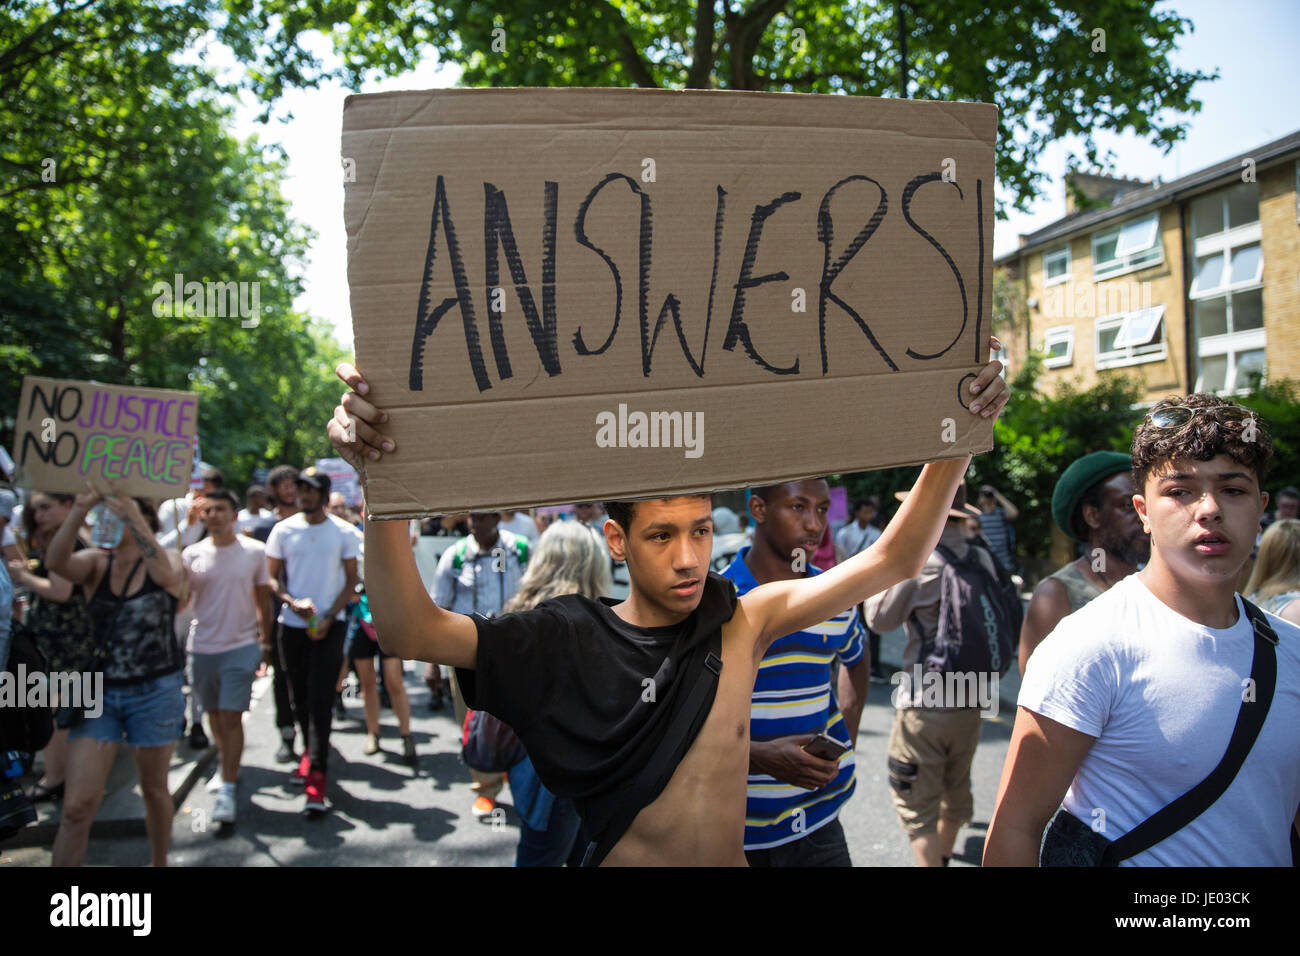 London, UK. 21st June, 2017. Activists from Movement For Justice By Any Means Necessary hold a 'Day of Rage' march from Shepherds Bush Green to Parliament Square to demand justice for those affected by the fire in the Grenfell Tower and to call for a change of government on the day of the Queen's Speech in Parliament. Credit: Mark Kerrison/Alamy Live News Stock Photo